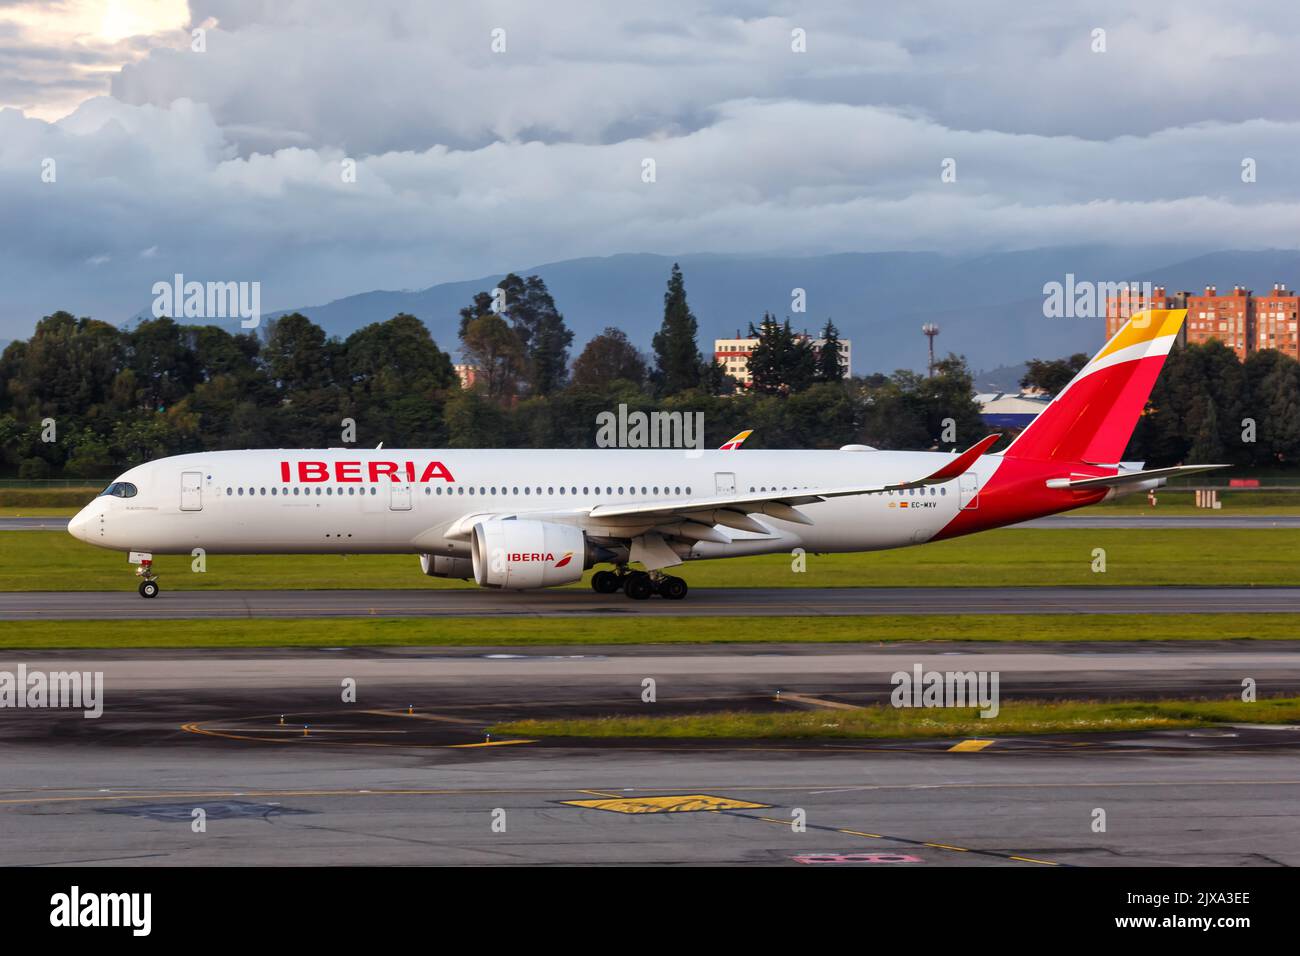 Bogota, Colombia - April 20, 2022: Iberia Airbus A350-900 airplane at Bogota airport (BOG) in Colombia. Stock Photo